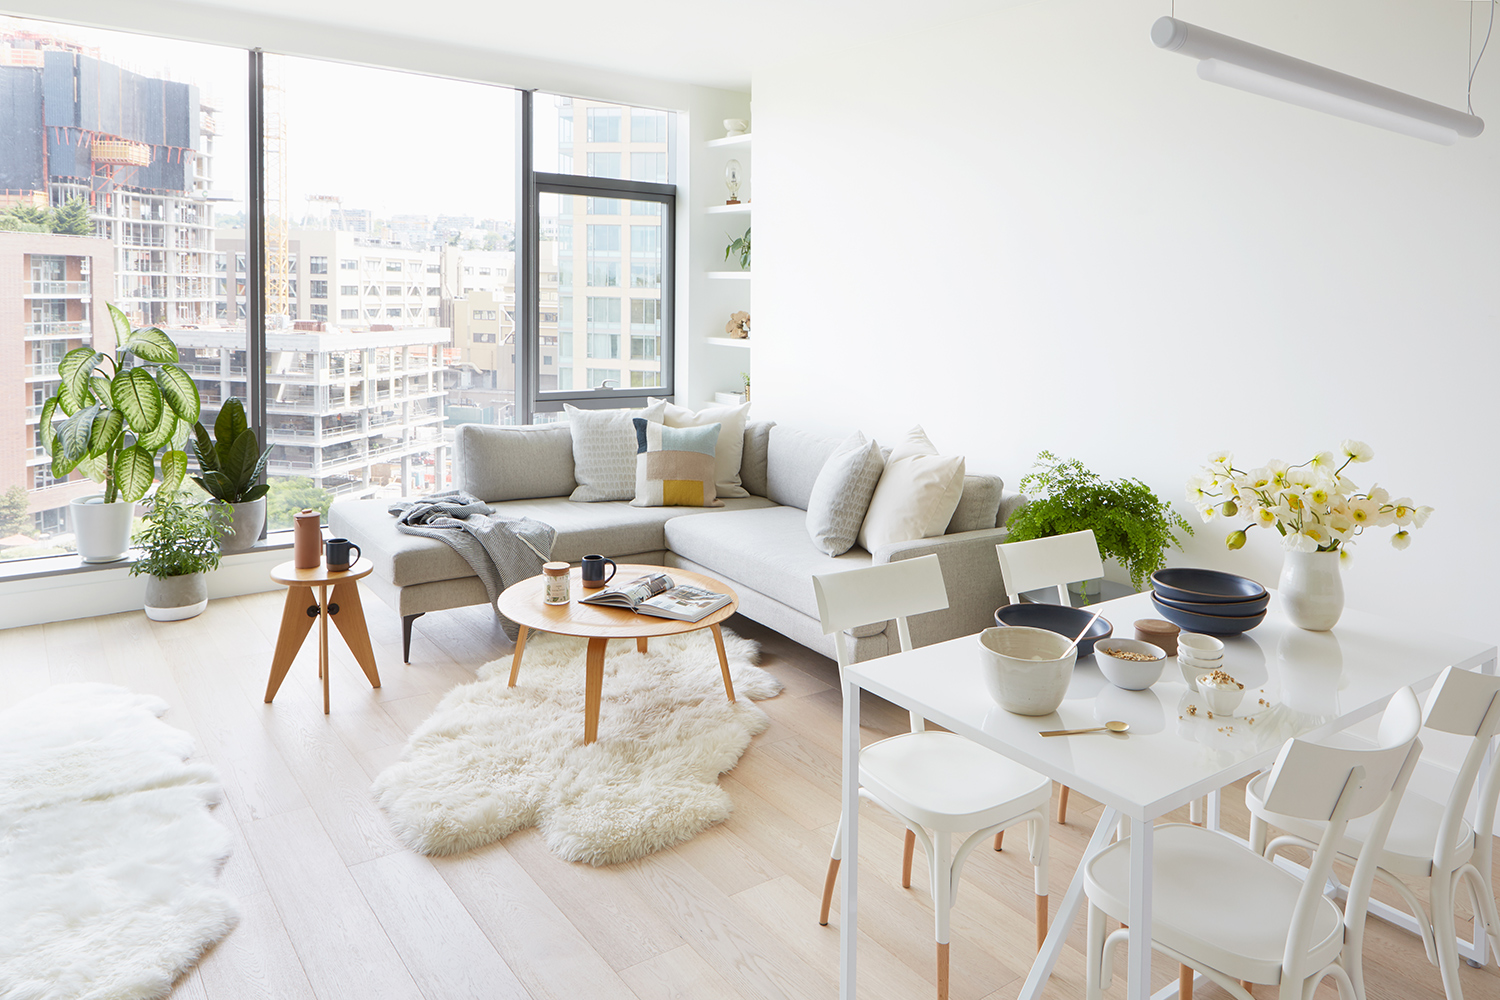 pix14 Scandinavian living room ideas that look awesome